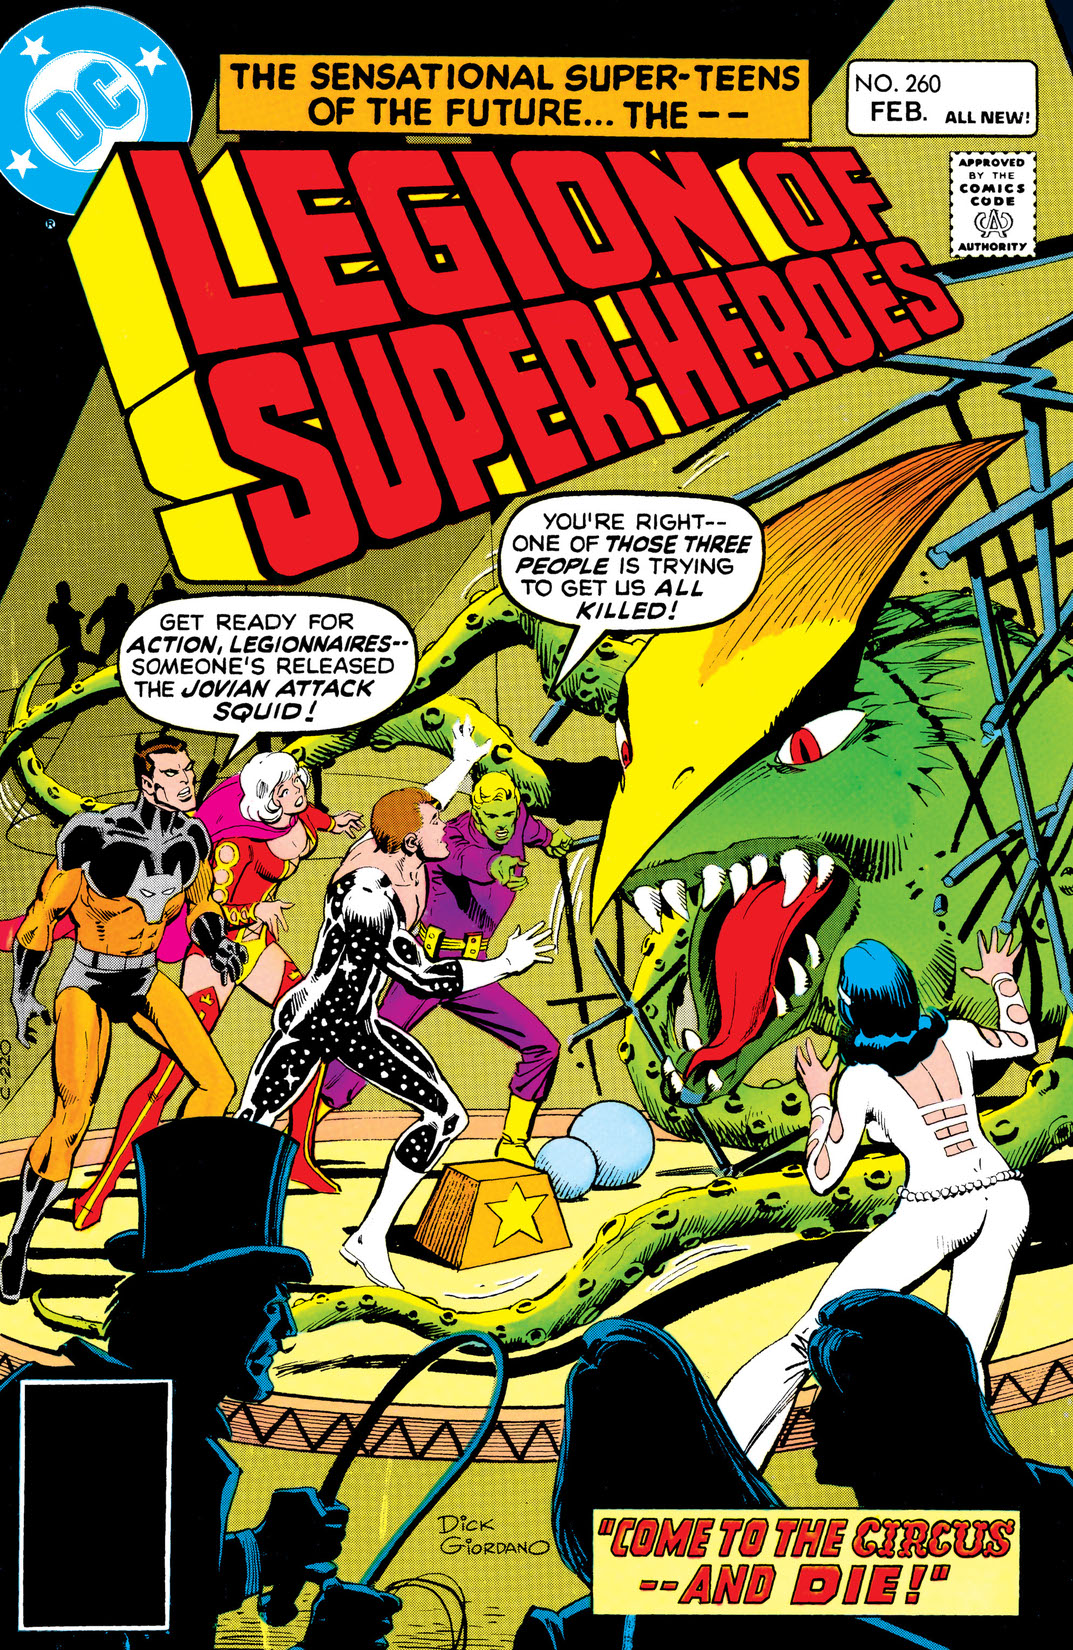 The Legion of Super-Heroes (1980-) #260 preview images